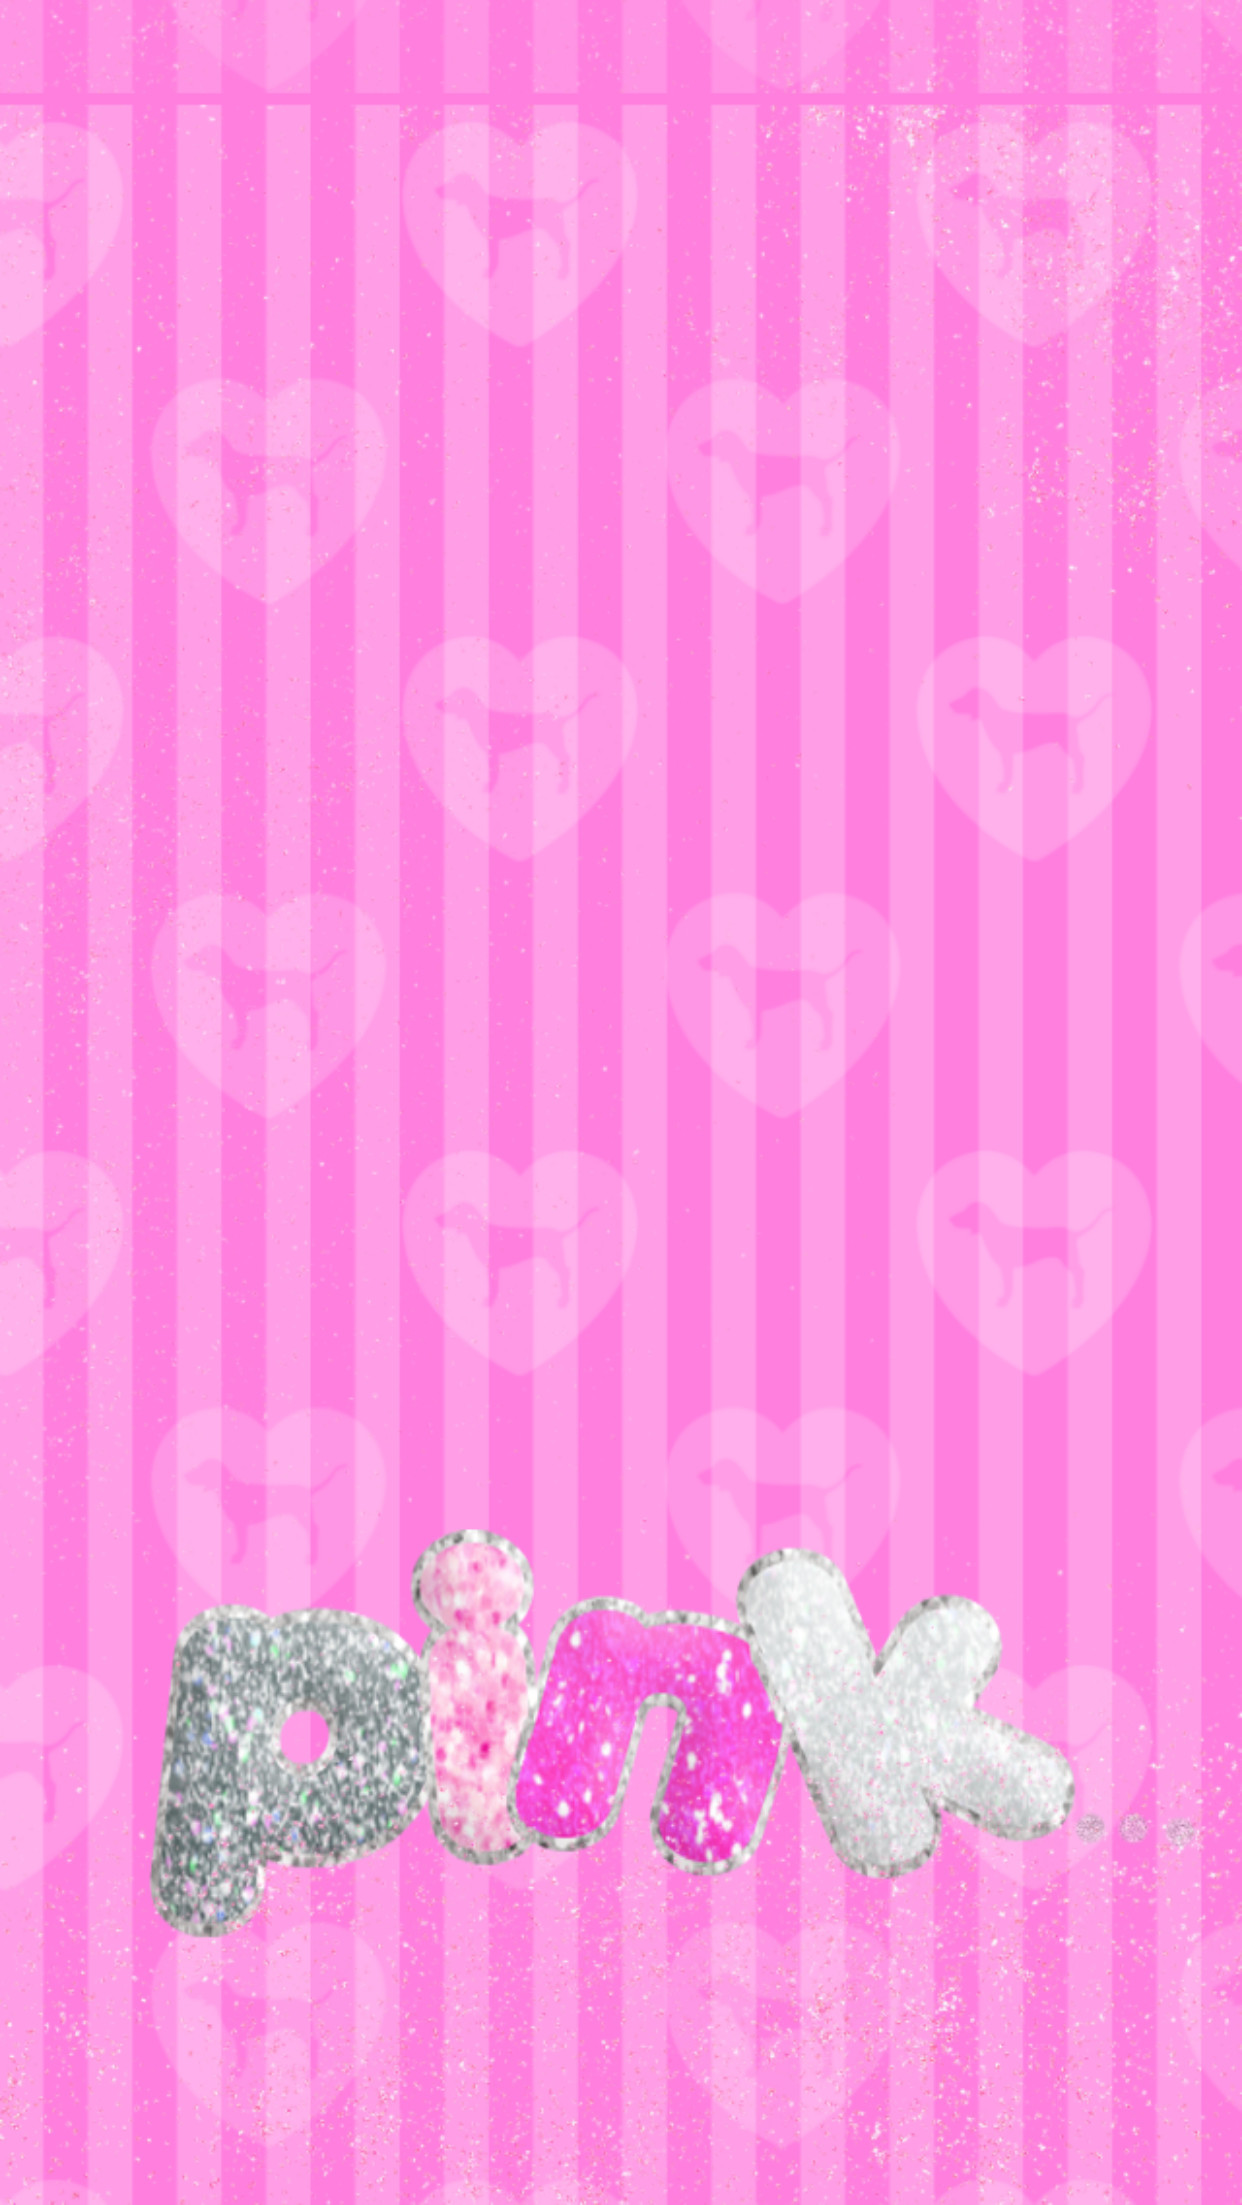 Cute Wallpapers, Phone Wallpapers, Iphone 3, Fashion Brands, Vs Pink, Wall  Papers, Hello Kitty, Android, Girly